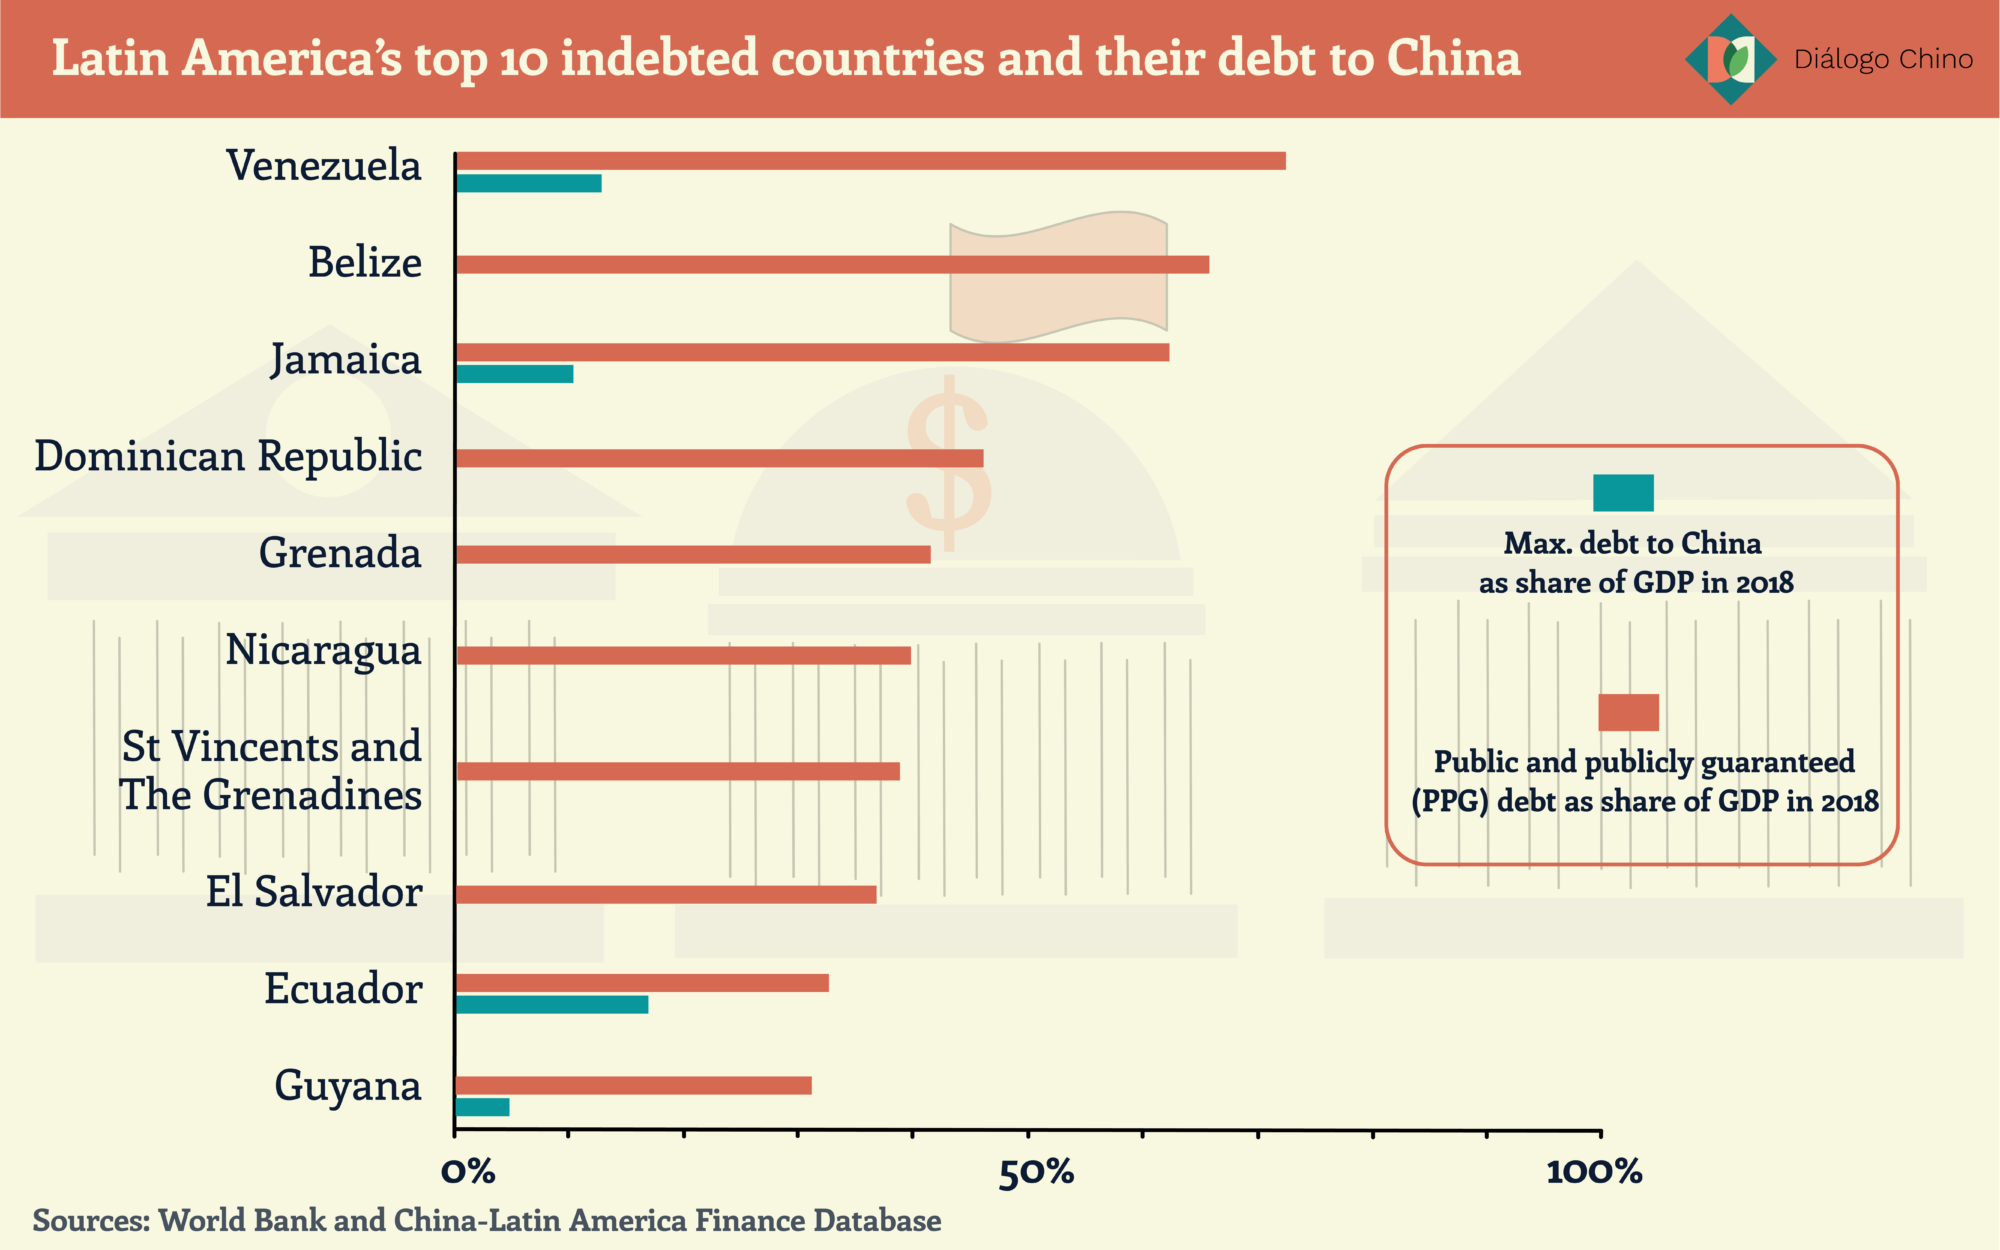 chart showing the ten most indebted countries in Latin America and their debt to China